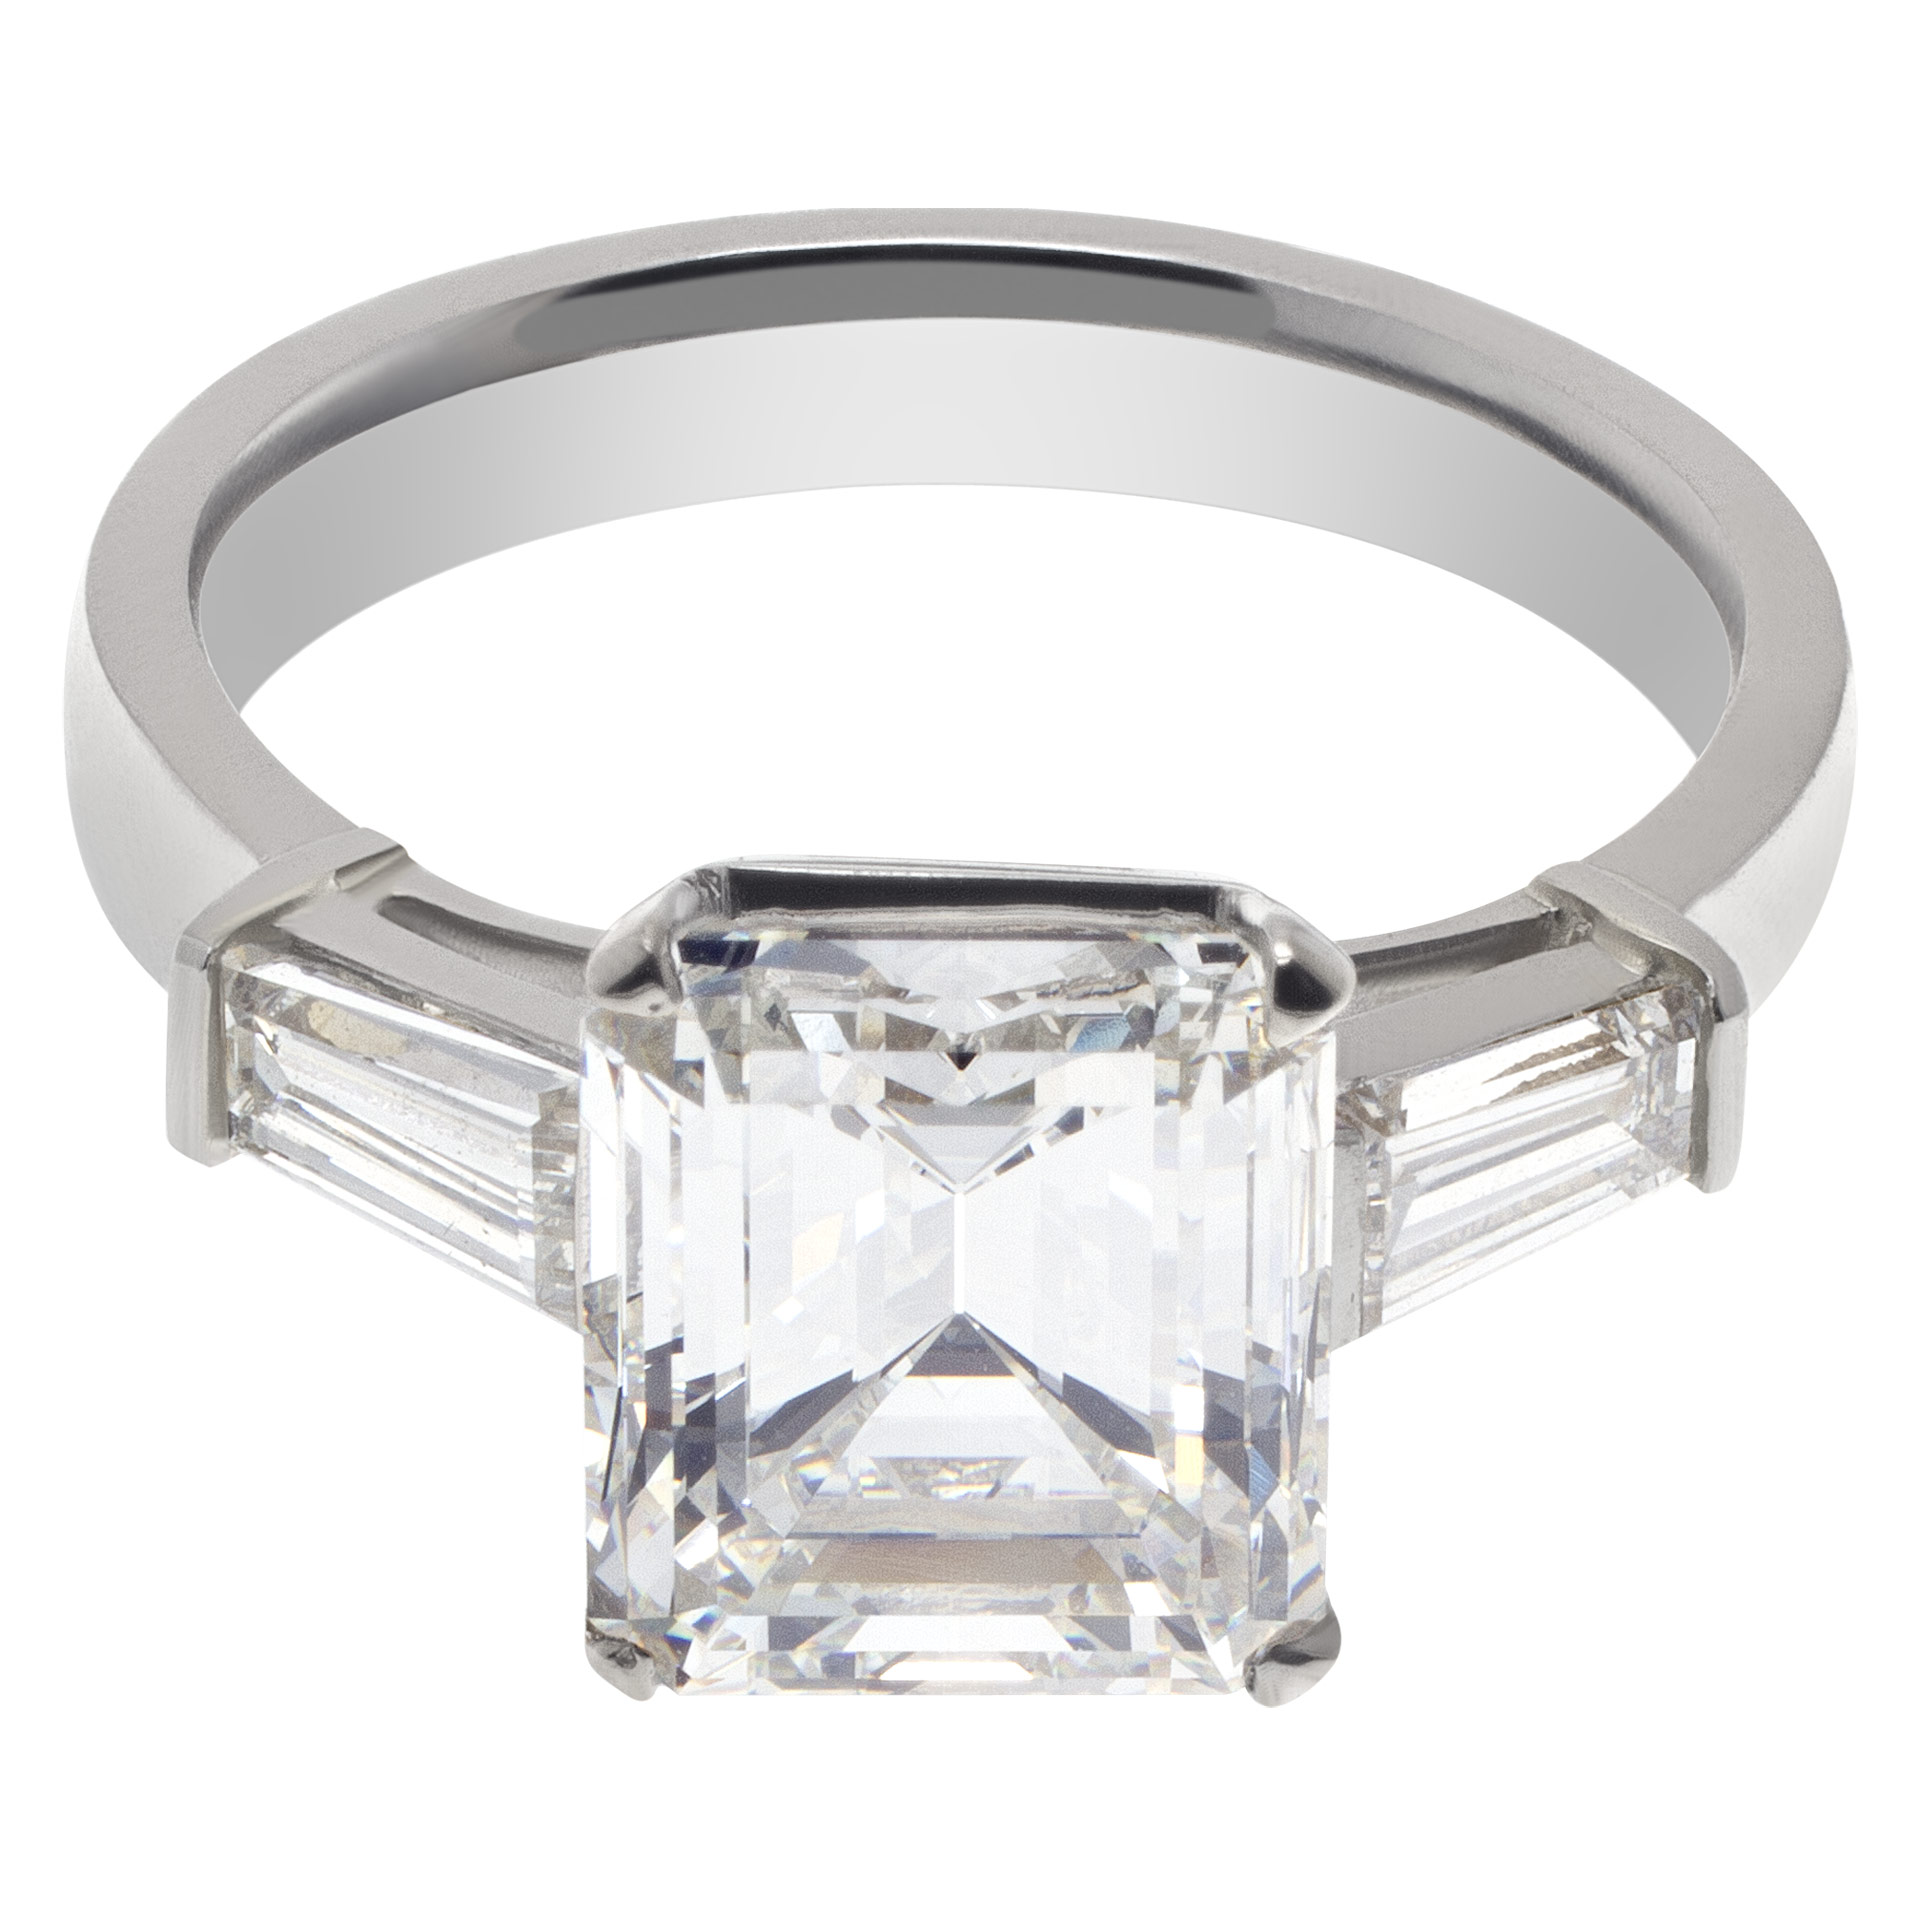 GIA certified emerald cut 3.95 carat (F color, VVS2 clarity) ring set in platinum setting image 3